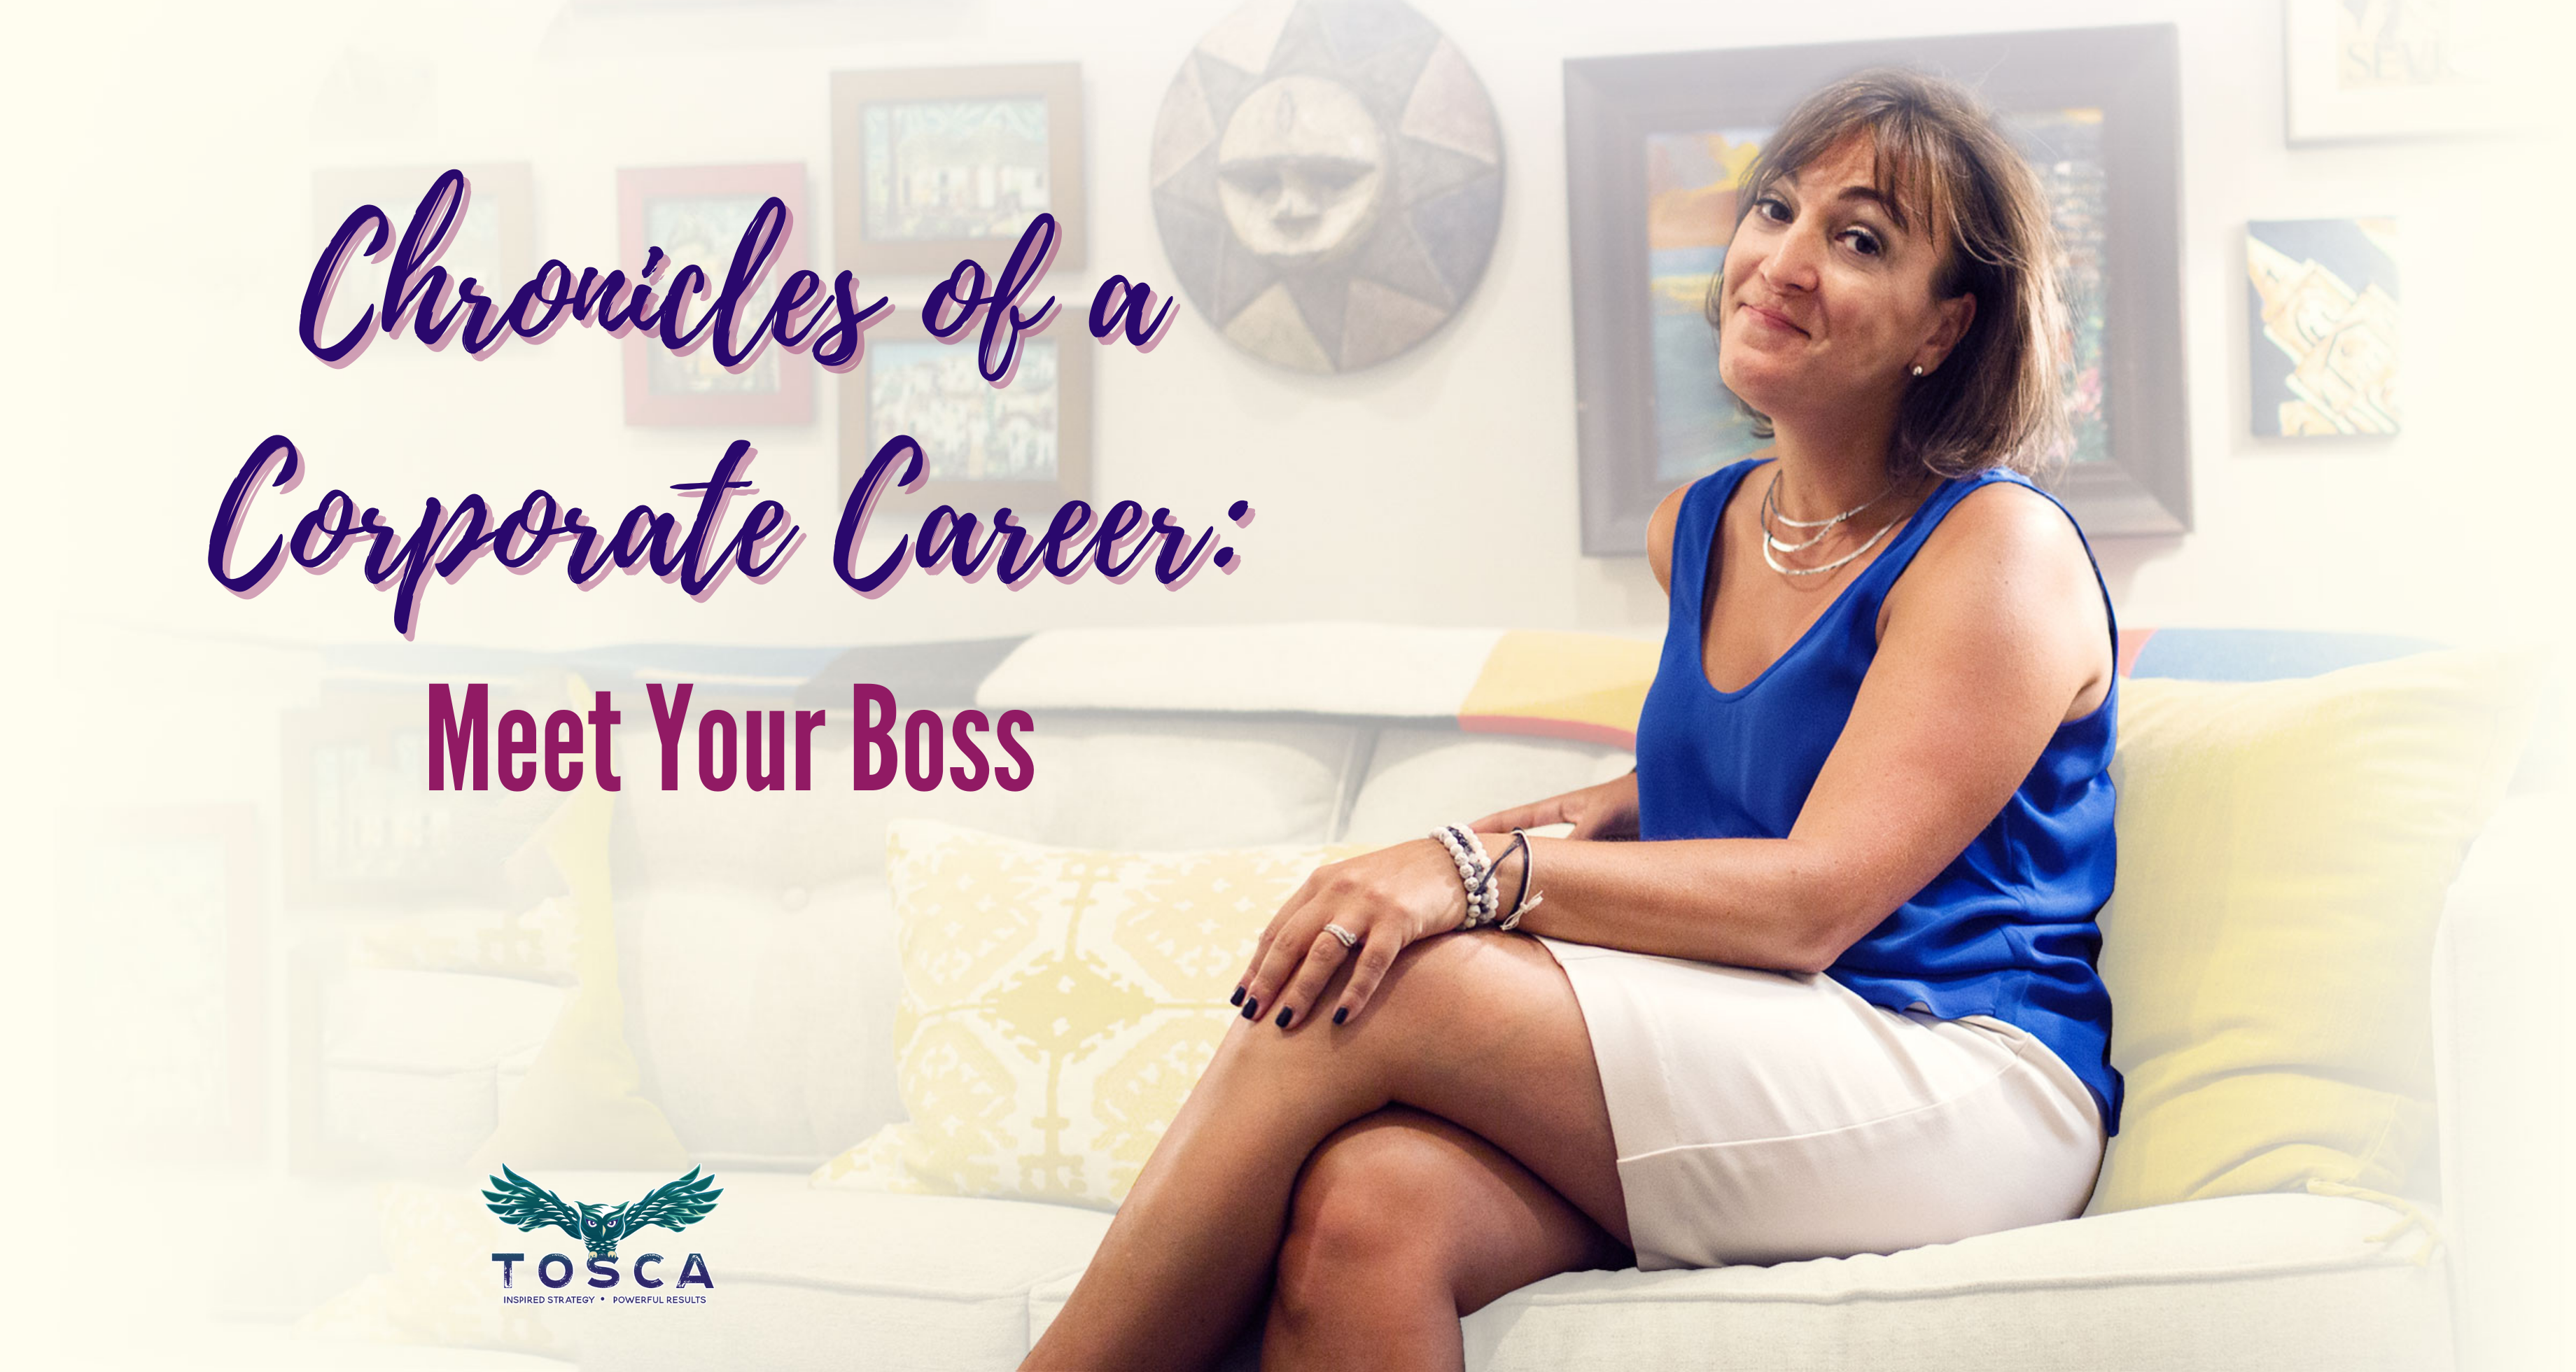 Chronicles of a Corporate Career: Meet Your Boss